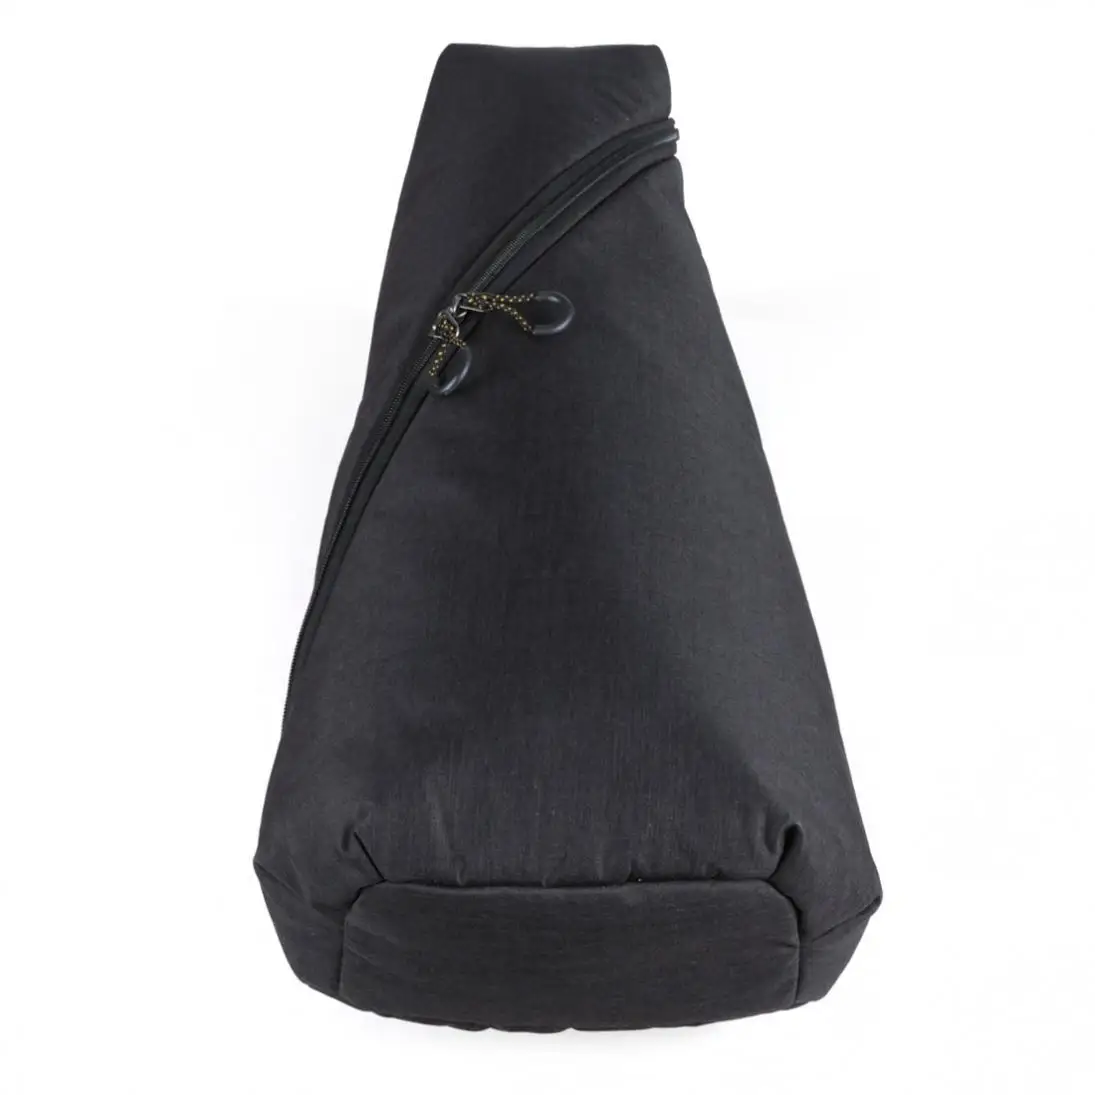 

Guitar Bags 21 / 23 Inch Universal Concise Style Ukulele Bag 10mm Cotton Soft Case Gig Nylon Cloth Backpack hot